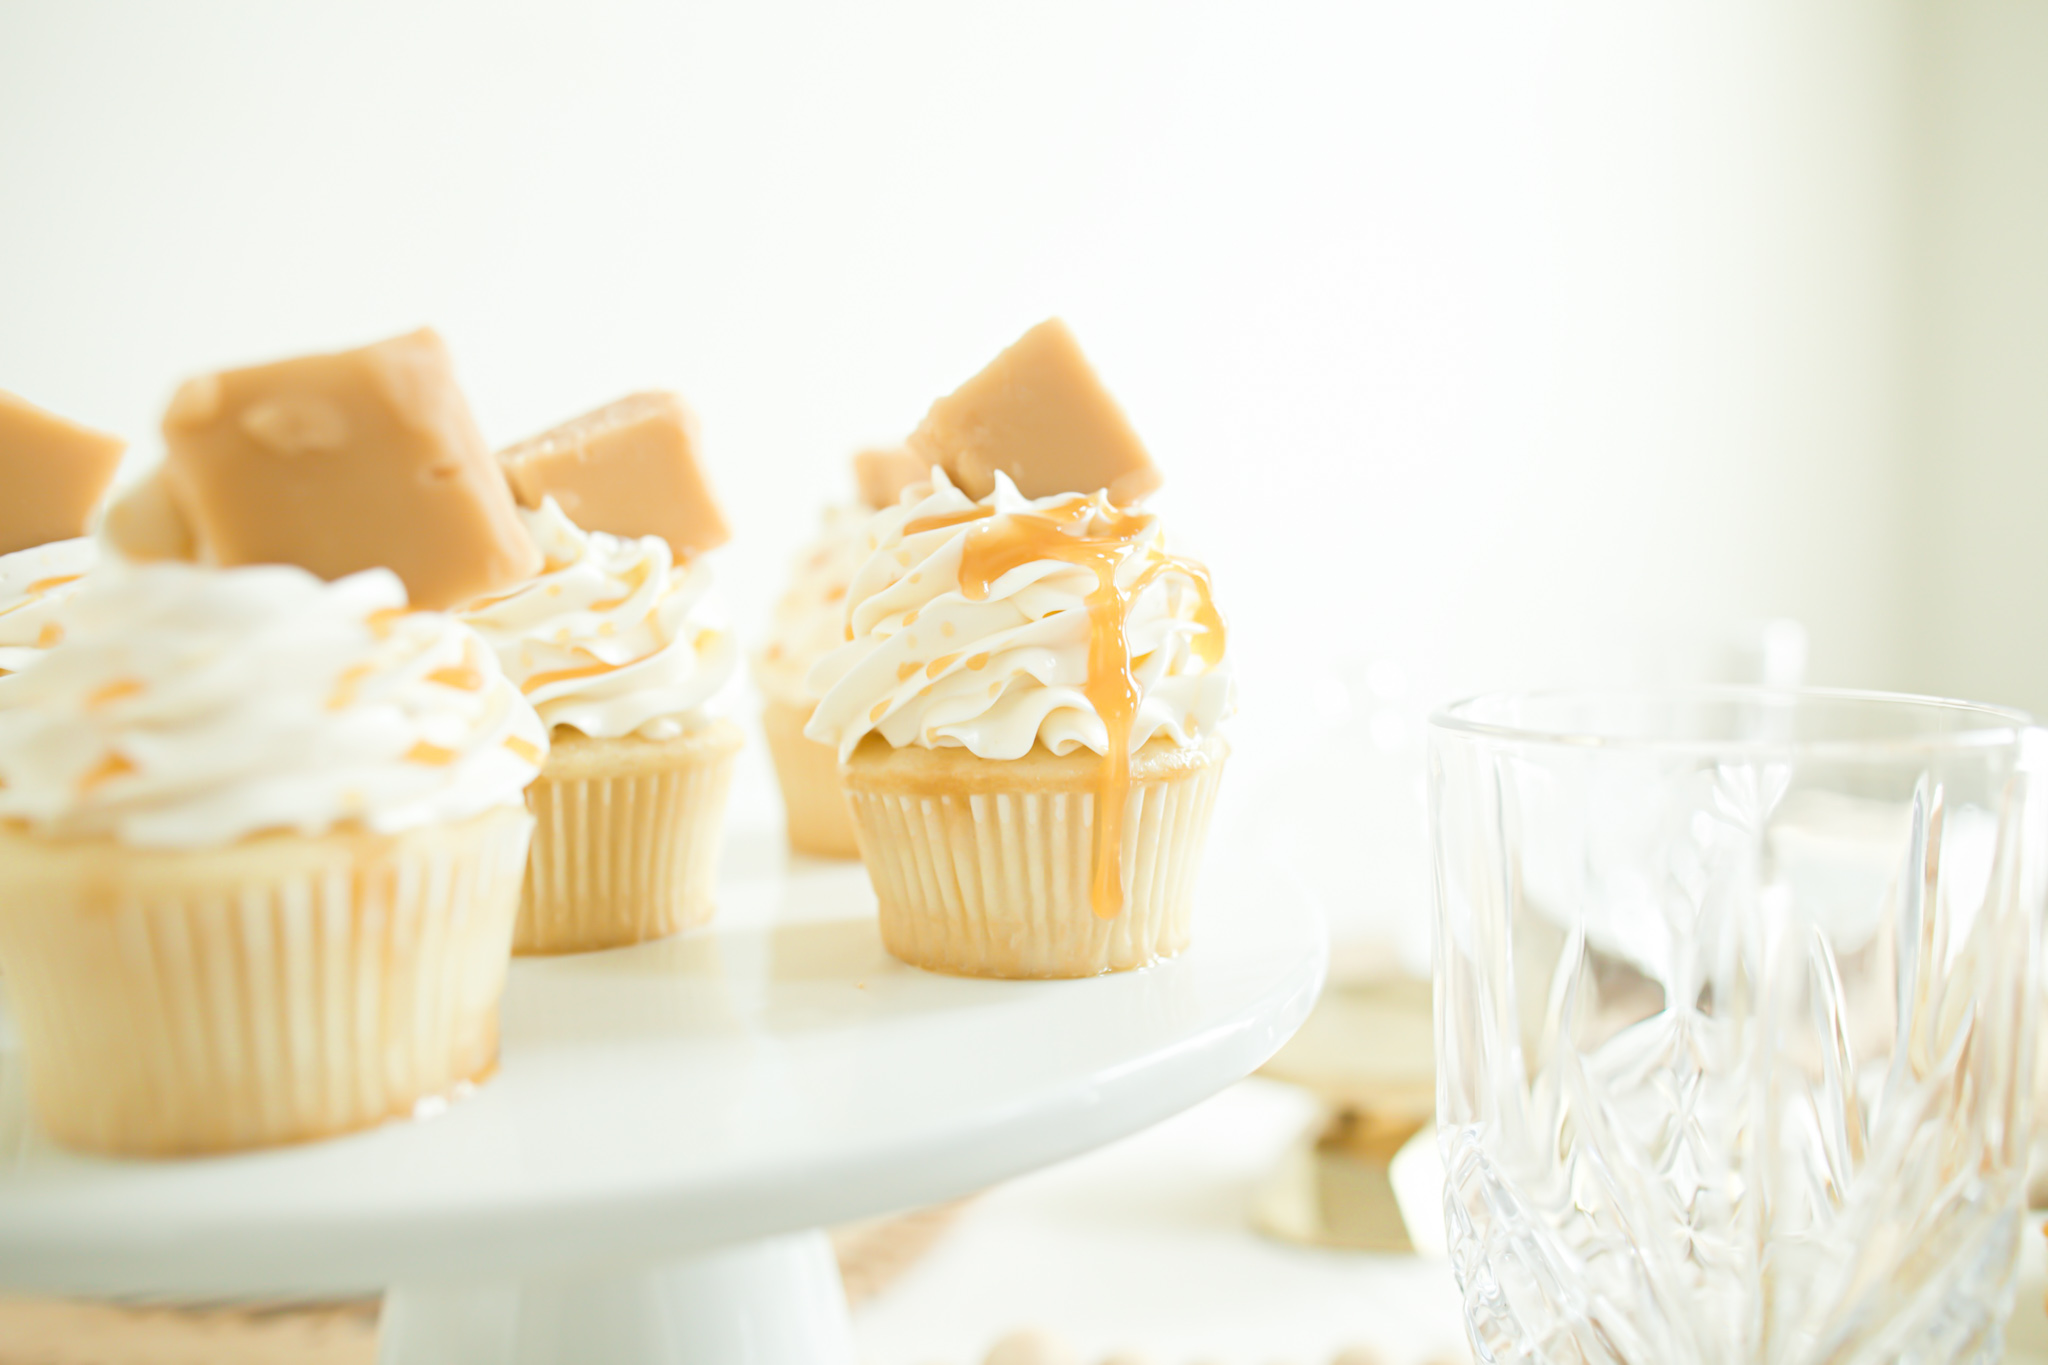 salted caramel cupcakes with vanilla frosting and vanilla fudge for garnish on decorated boho table